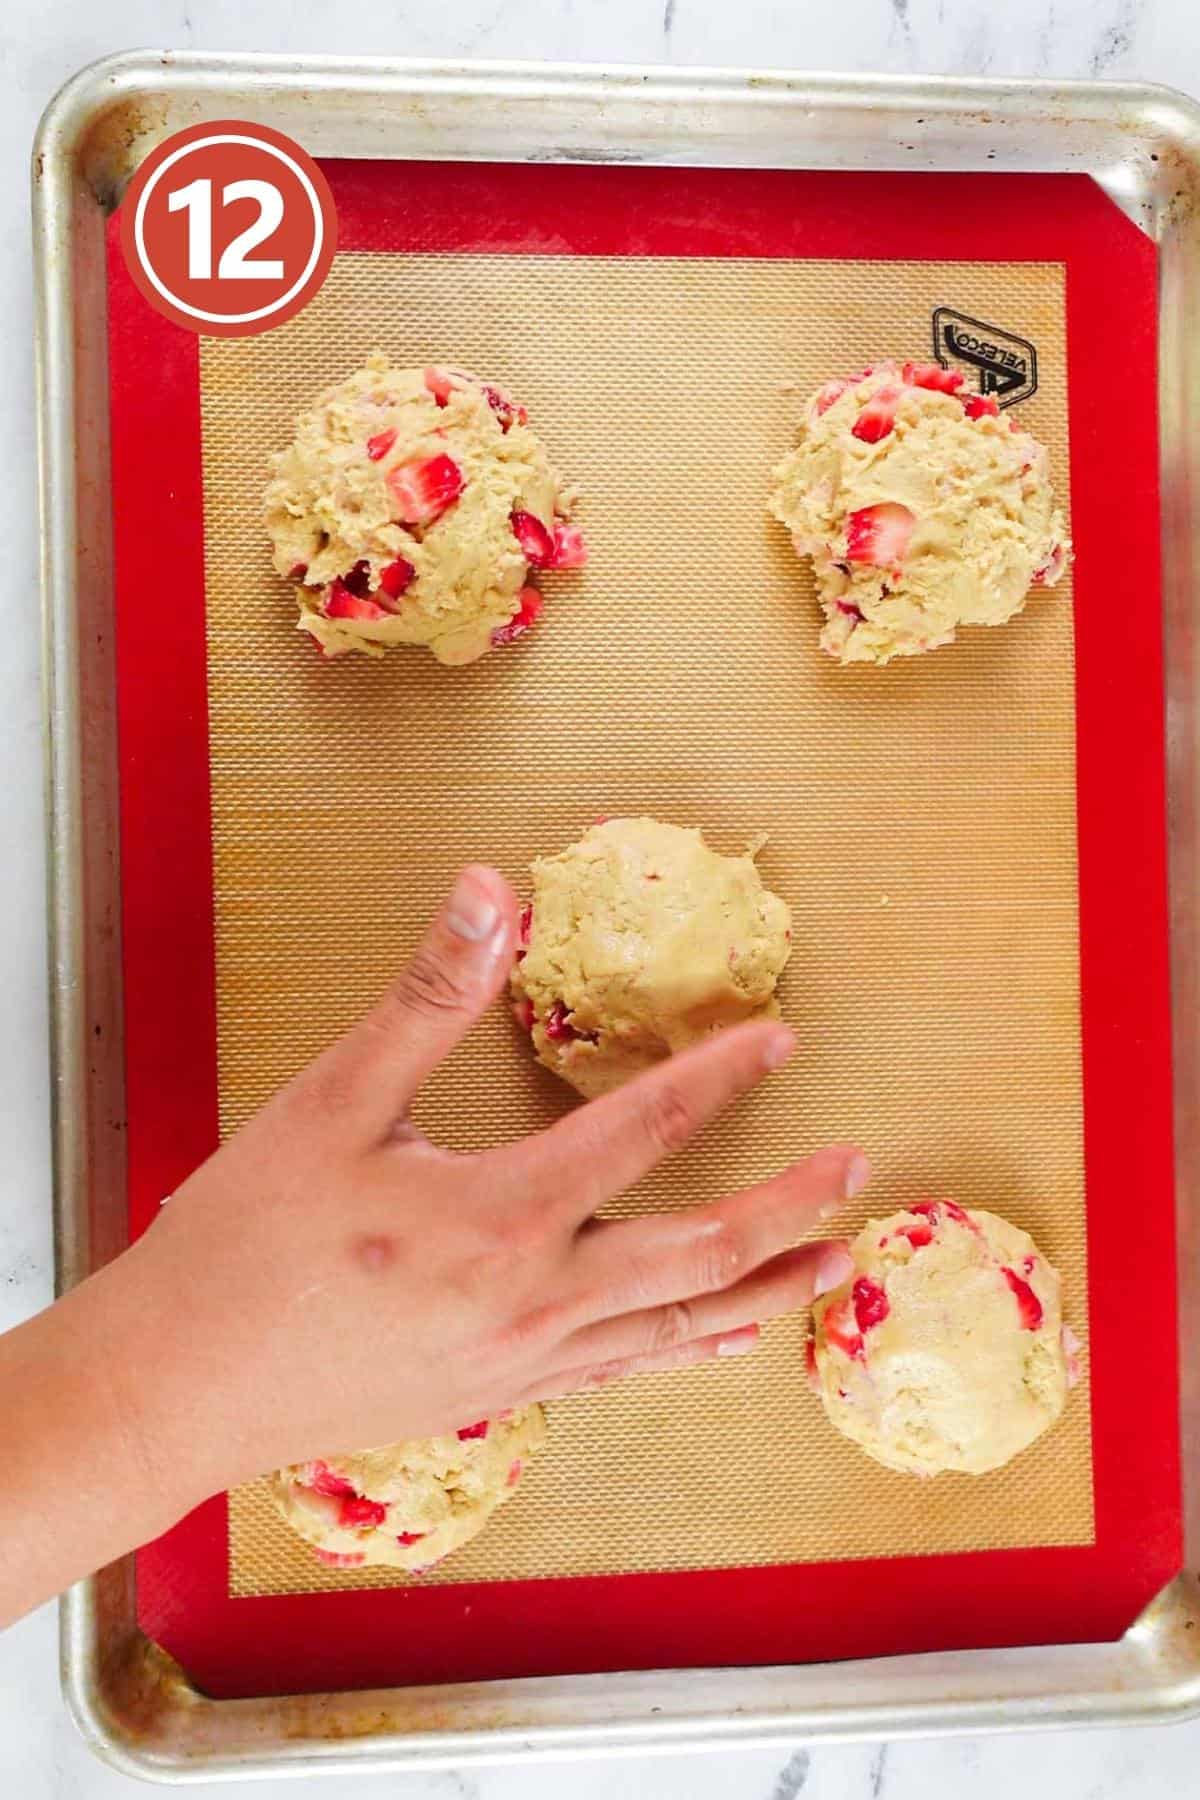 putting more cookies batter on the top of the cookie.